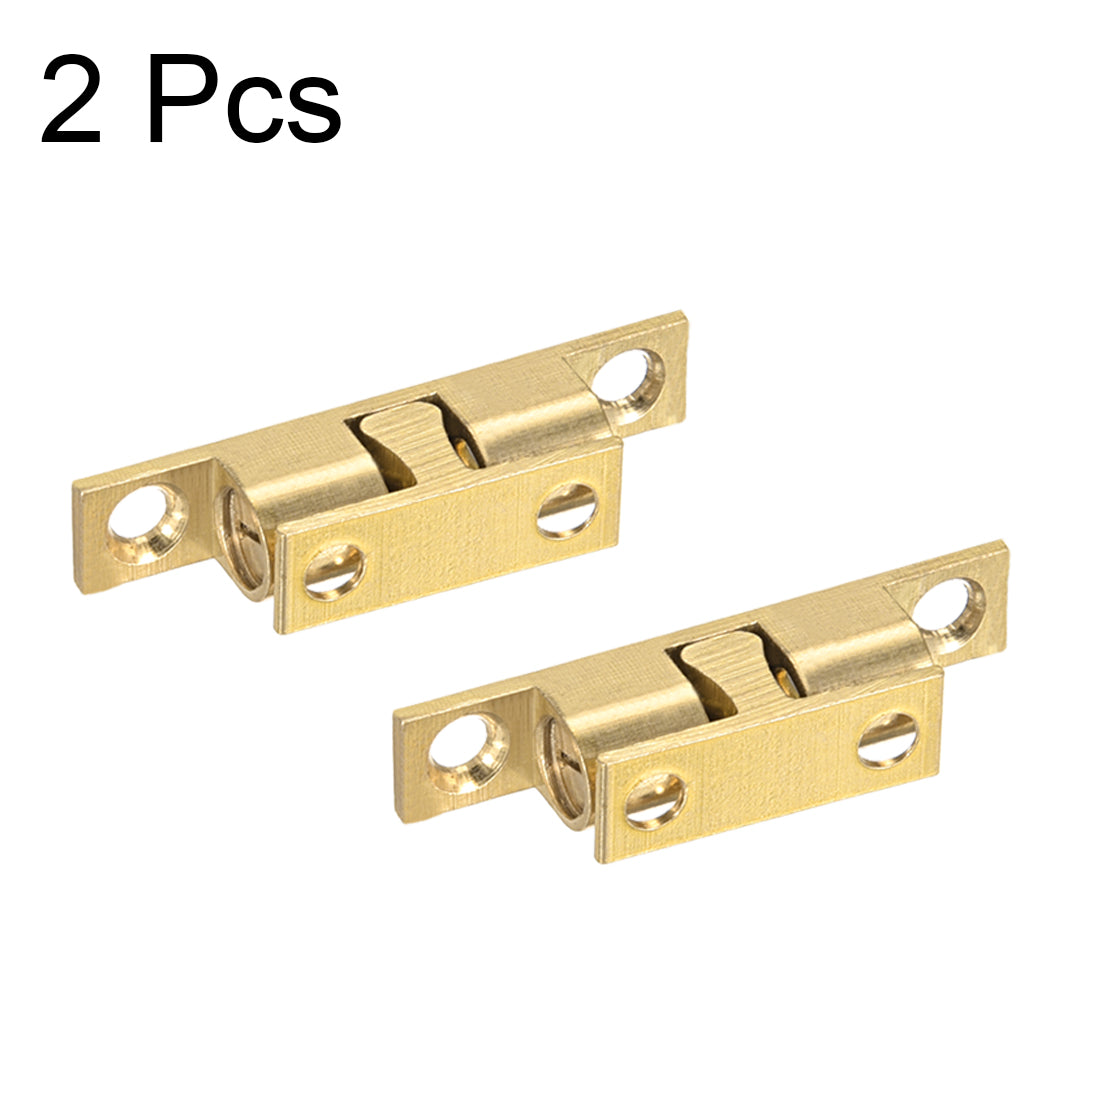 uxcell Uxcell Cabinet Door Closet Brass Double Ball Catch Tension Latch 42mm Length Gold Tone 2pcs